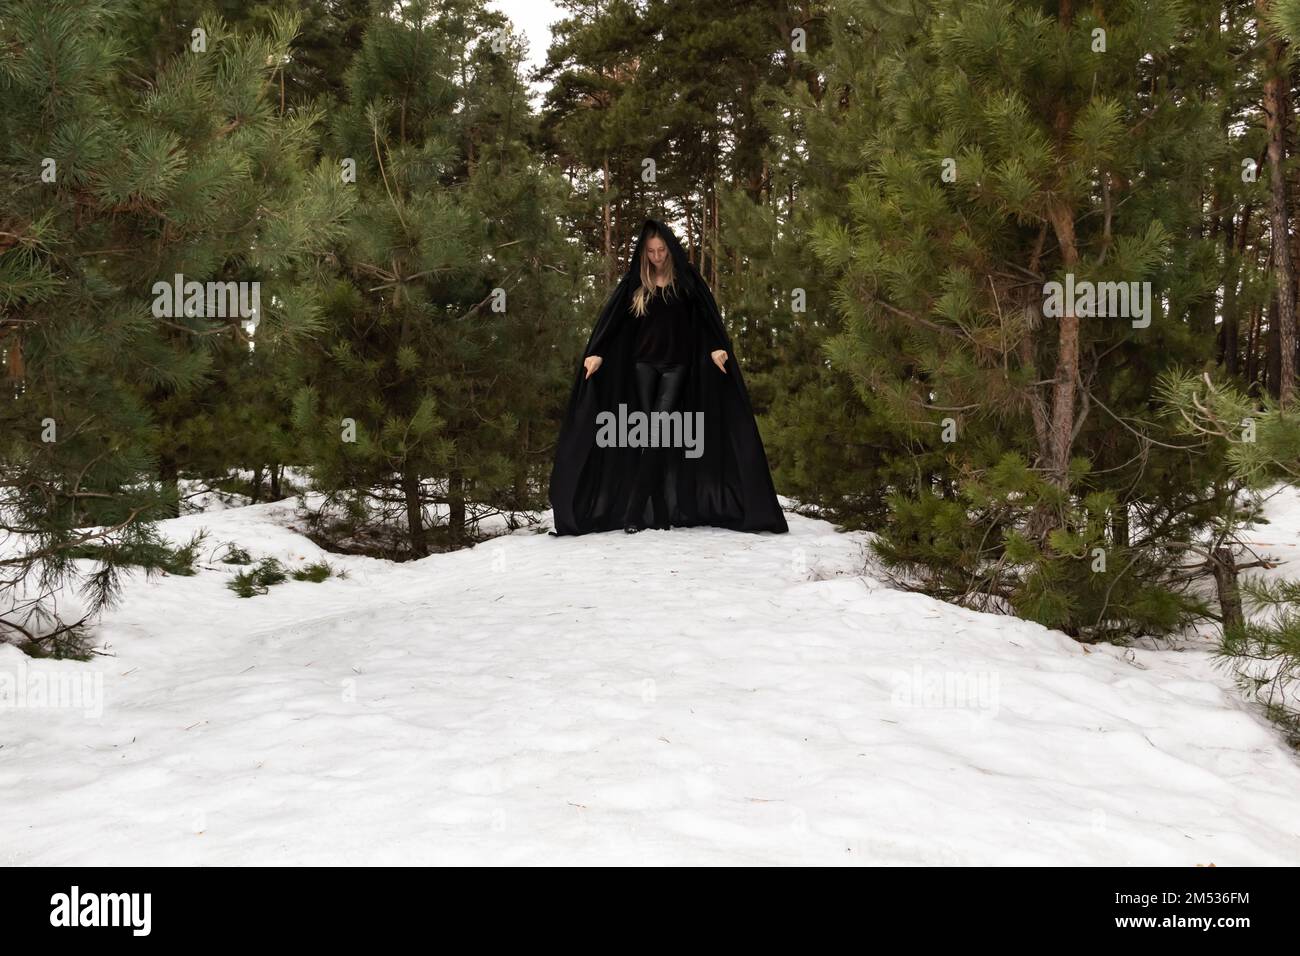 Blonde woman in a black cloak with a hood in winter in a pine forest Stock Photo